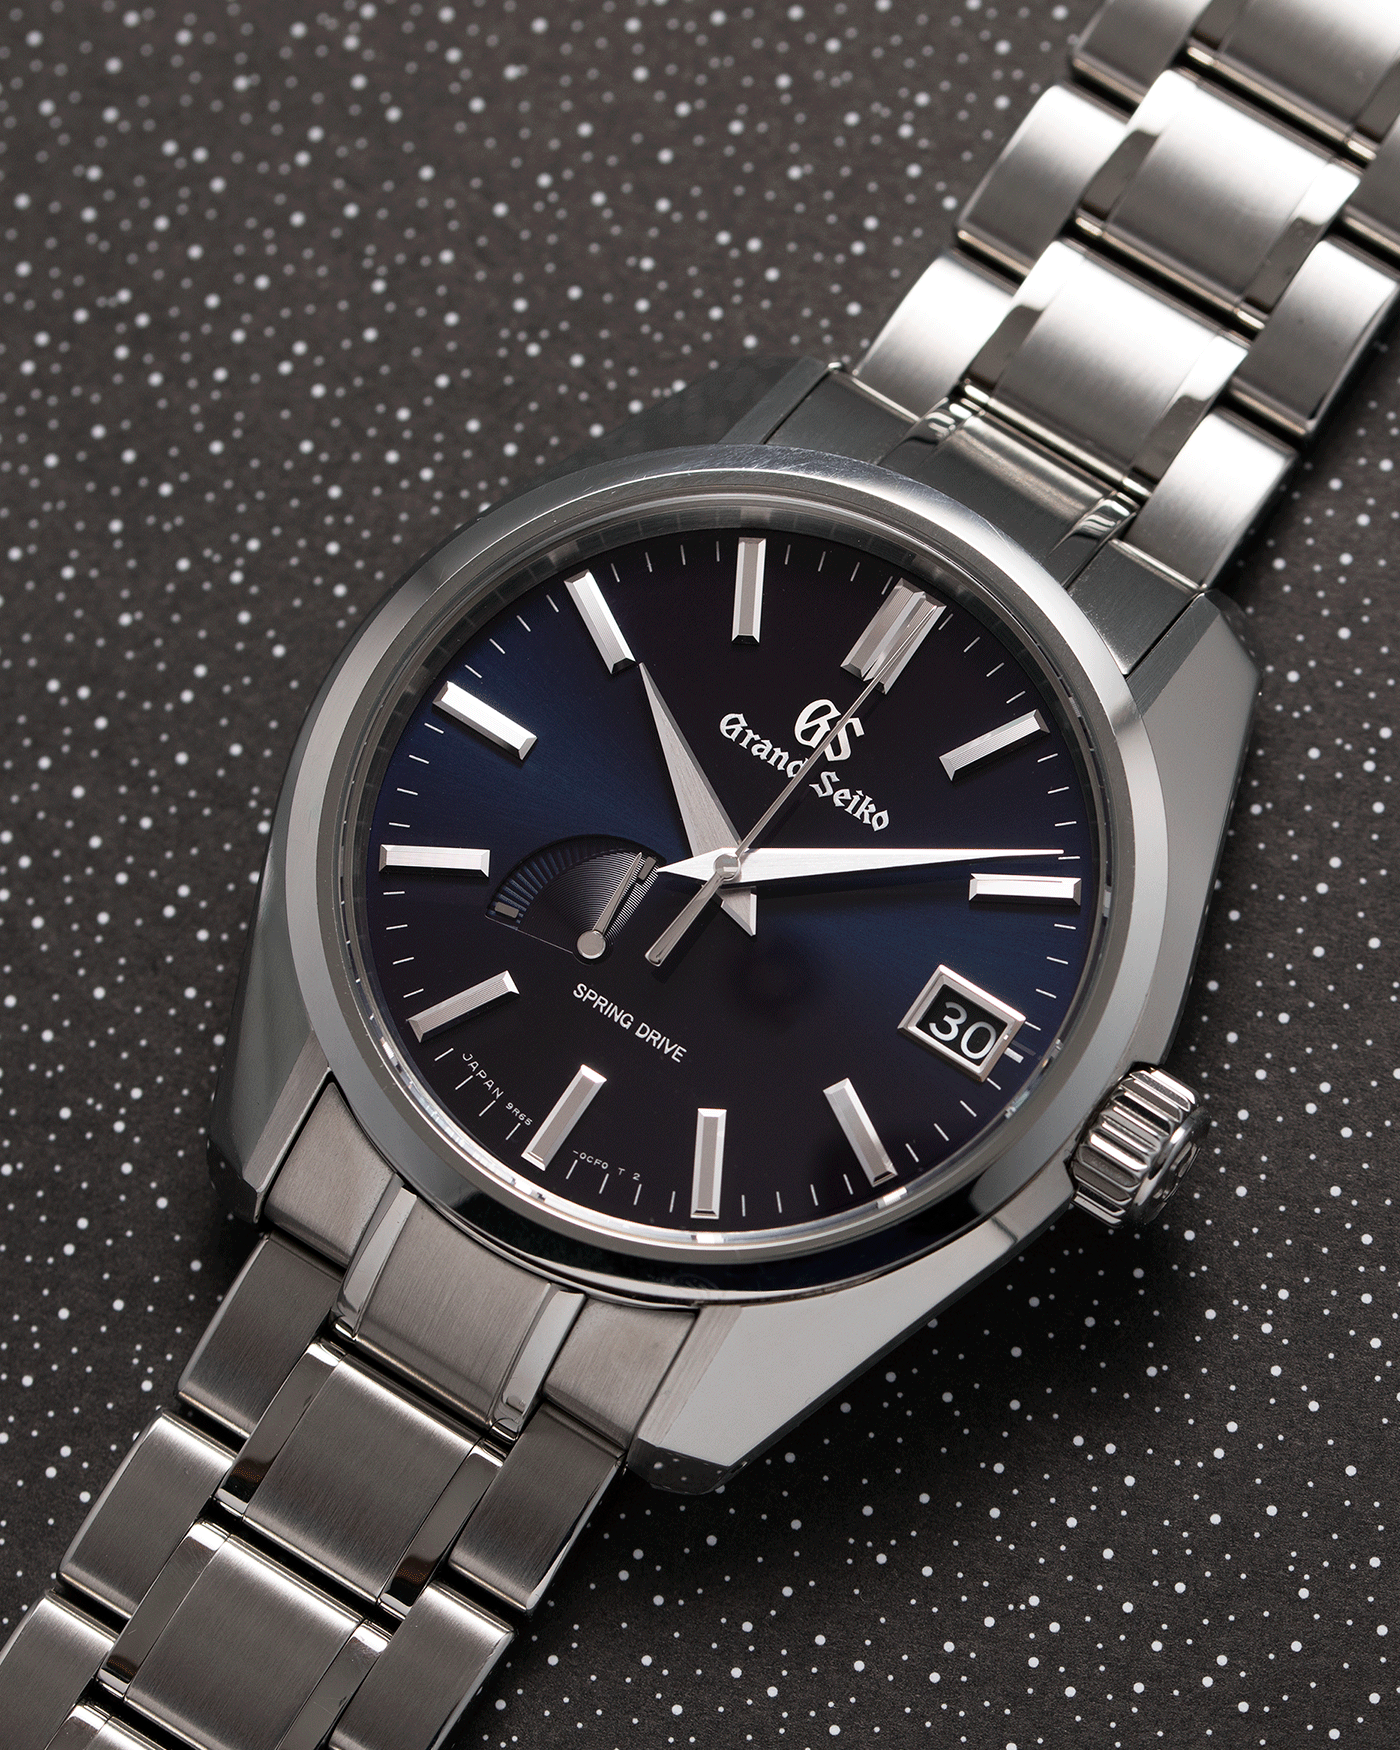 Brand: Grand Seiko Year: 2019 Reference Number: SBGA375 Spring Drive Material: Stainless Steel Movement: Cal 9R65 Case Diameter: 40mm Bracelet: Grand Seiko Stainless Steel Bracelet